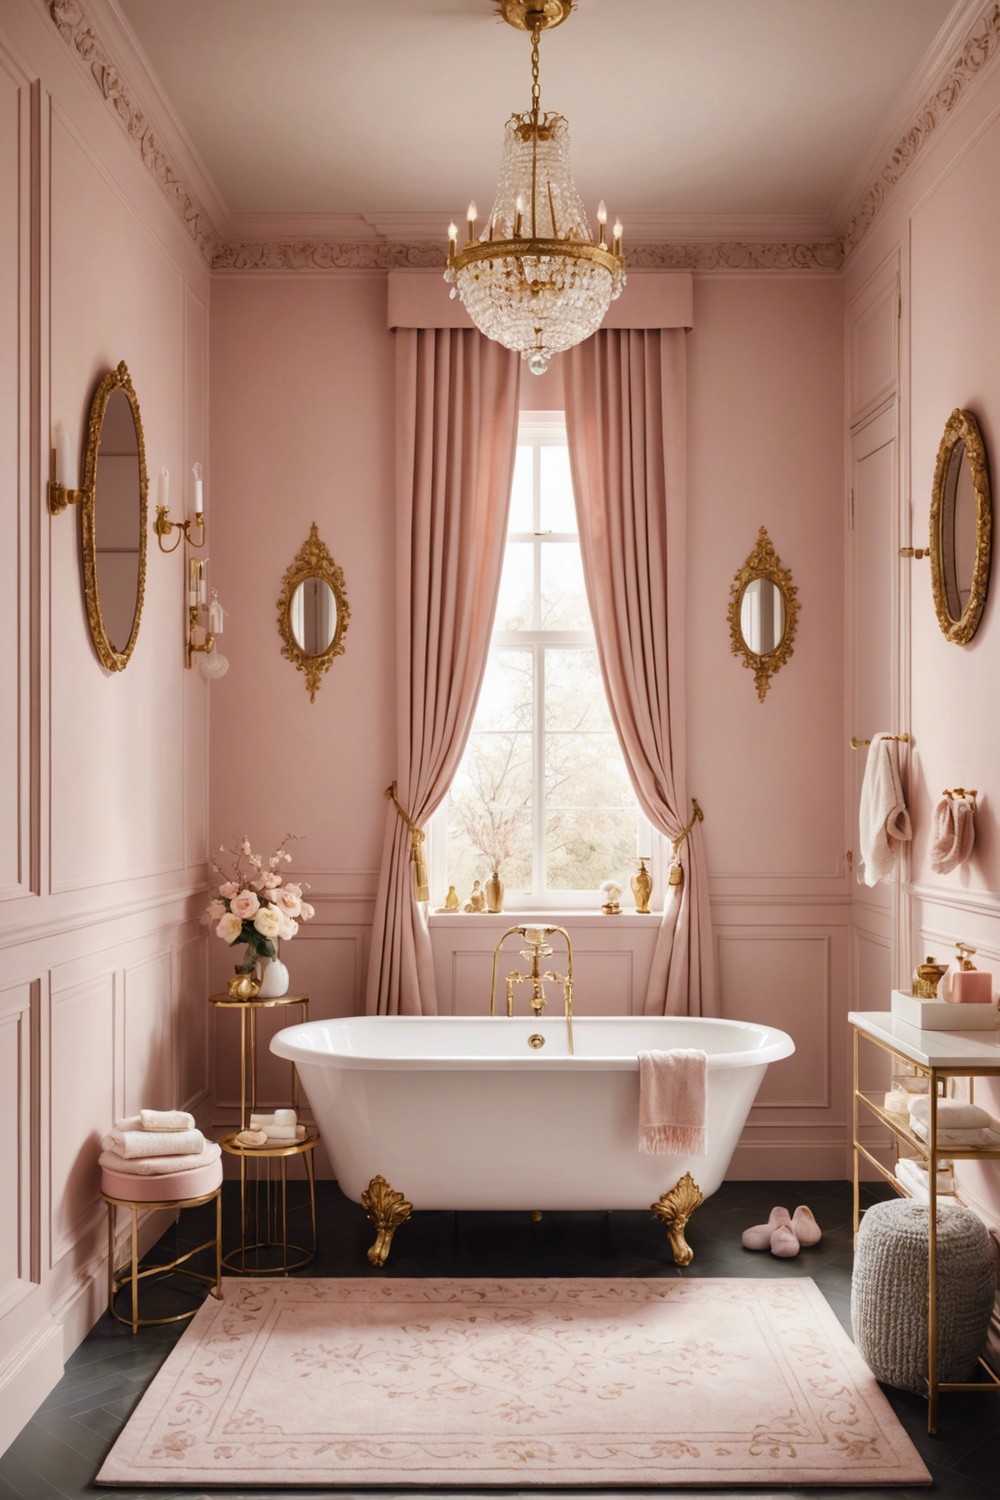 Blush Pink and Gold Accents